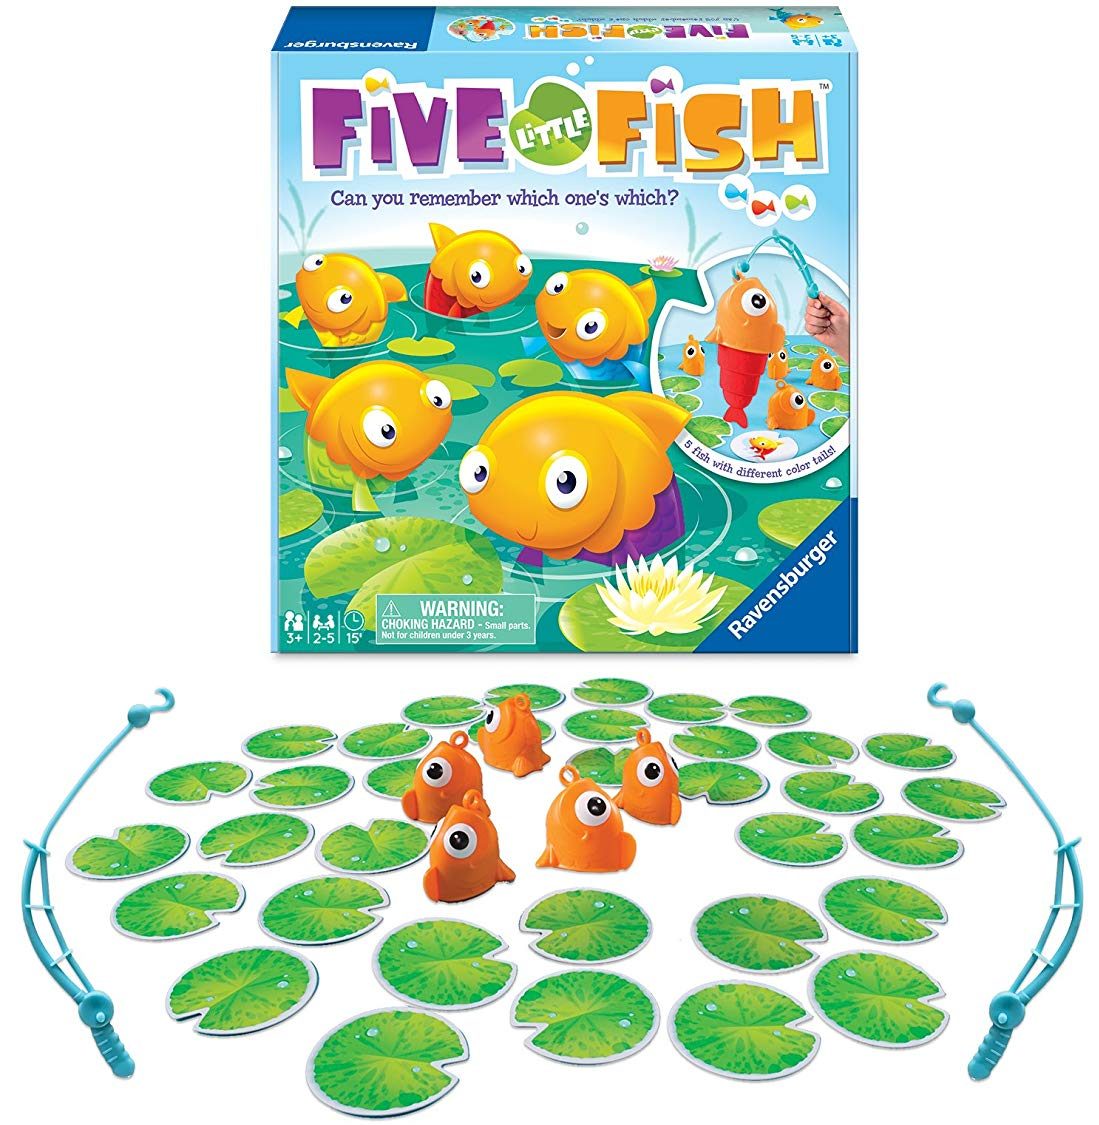 Five Little Fish Game pieces